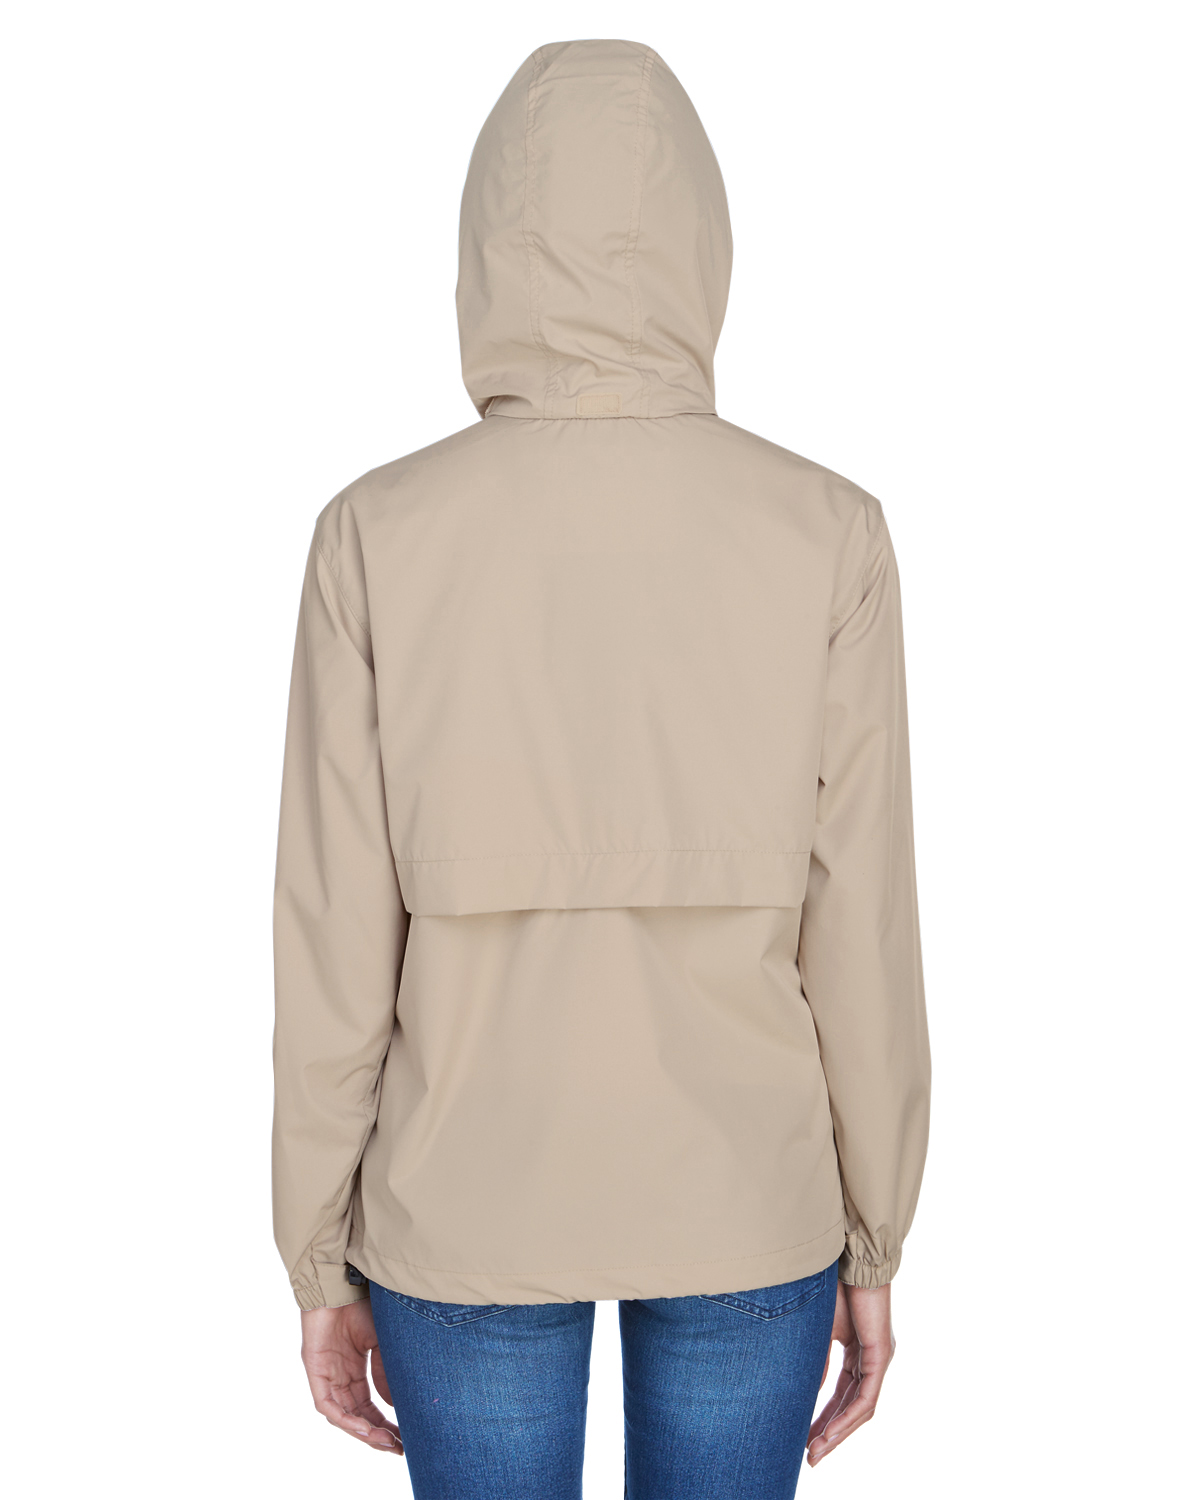 The Ash City - North End Ladies' Techno Lite Jacket - PUTTY 734 - L - image 2 of 2